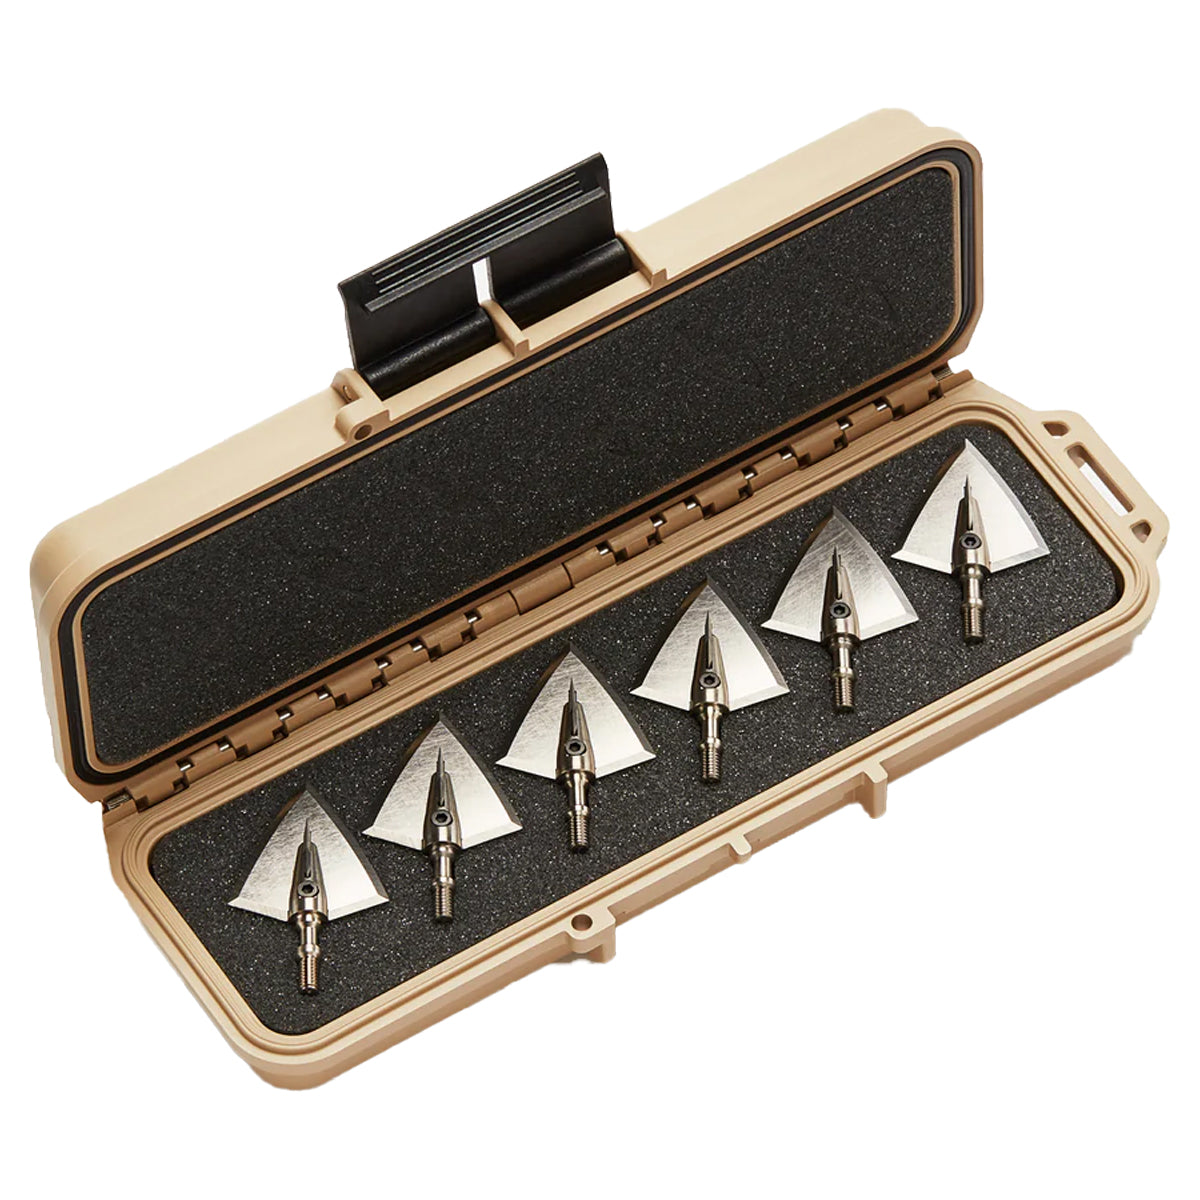 Day Six Gear Evo 100 Grain Broadheads - 6 Pack with SKB Hard Case in  by GOHUNT | Day Six - GOHUNT Shop